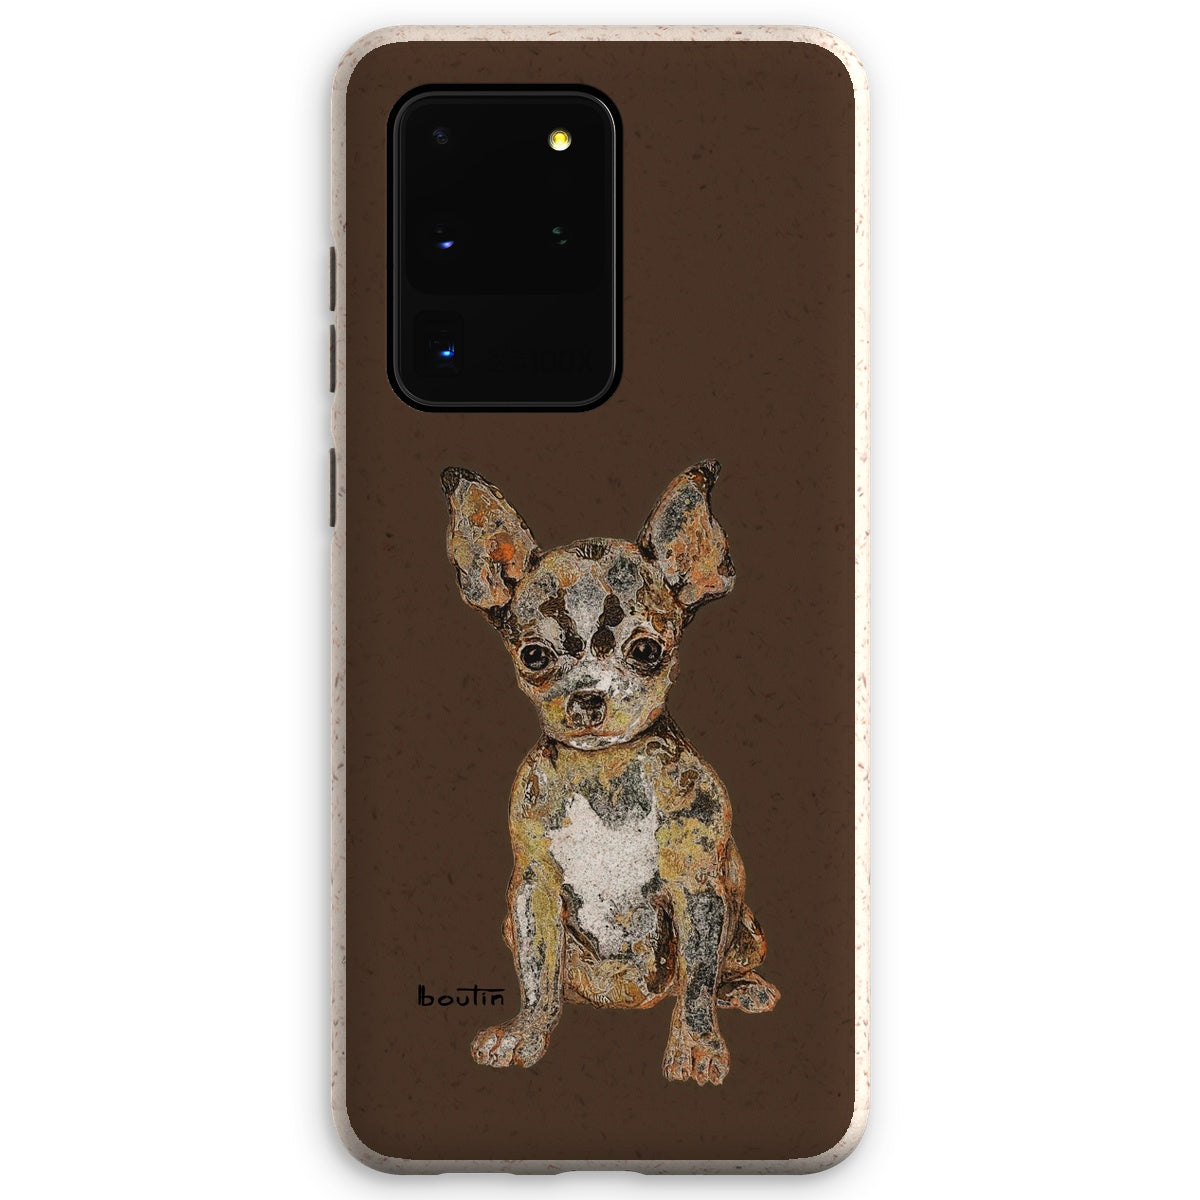 Agathe brown eco-friendly cell phone case